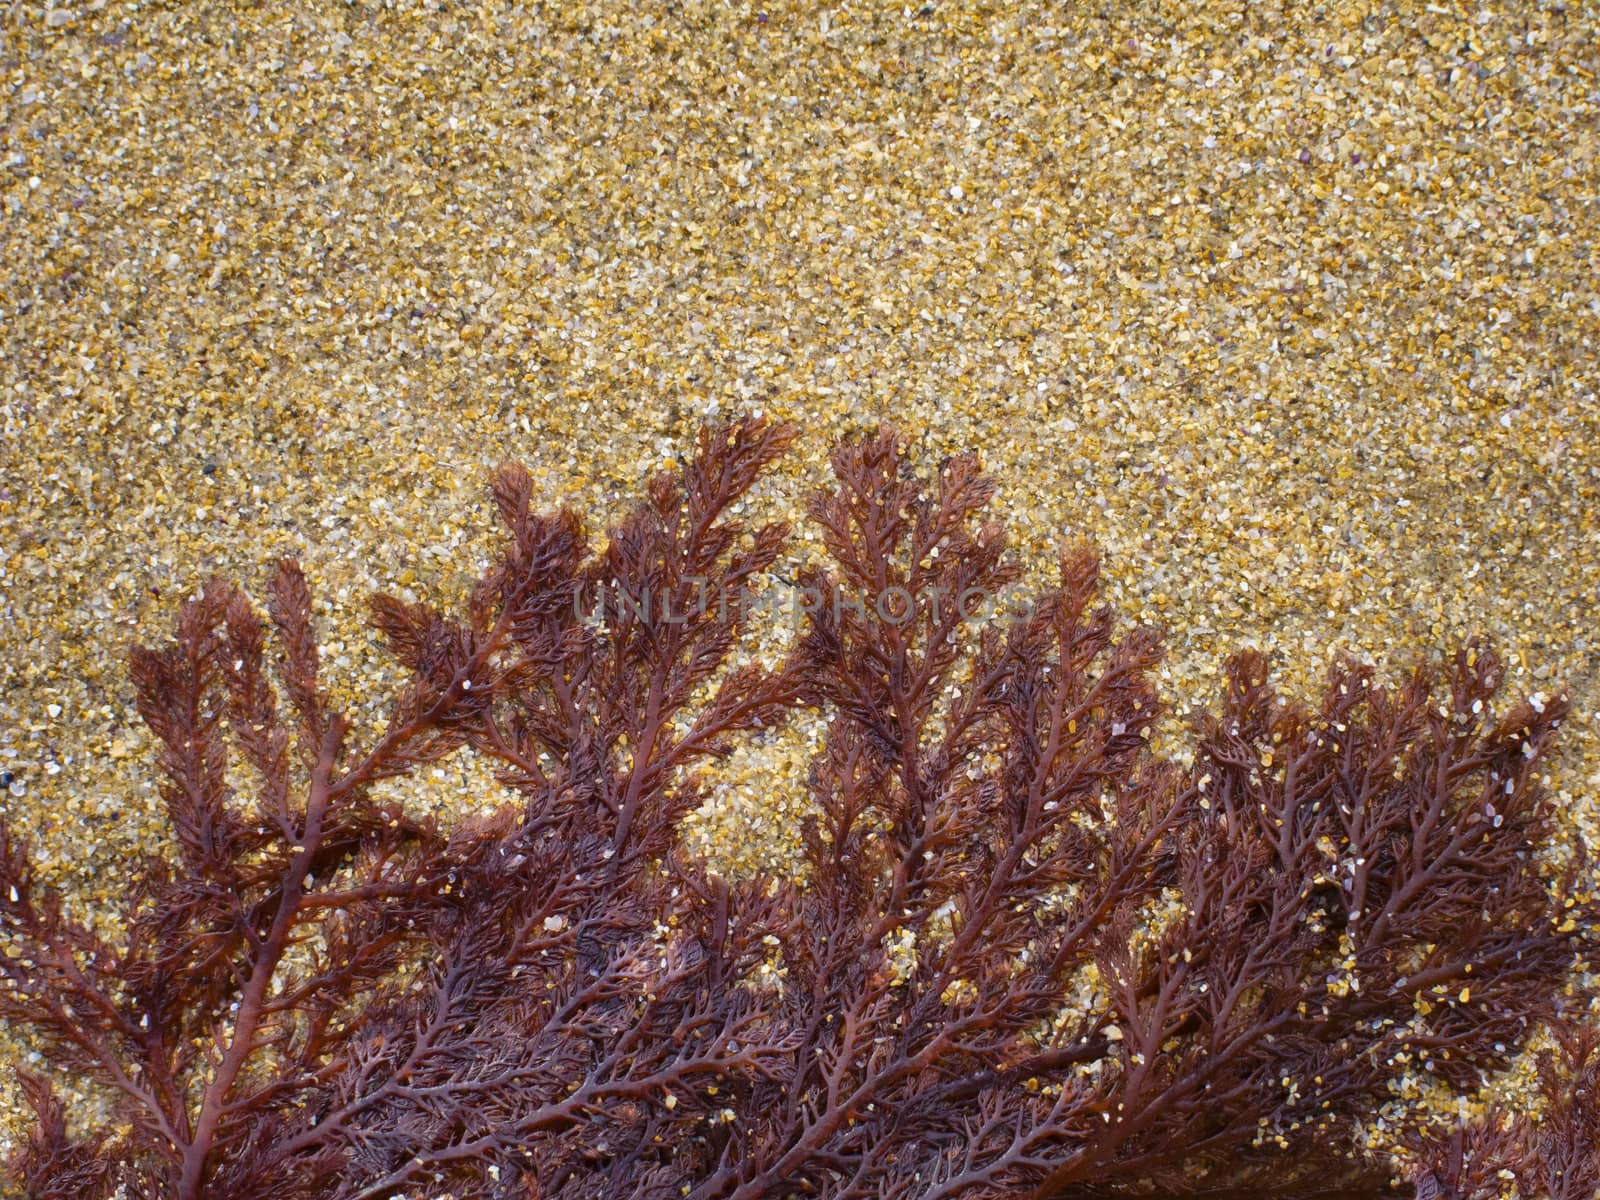 Kelp on the Sand by demachy